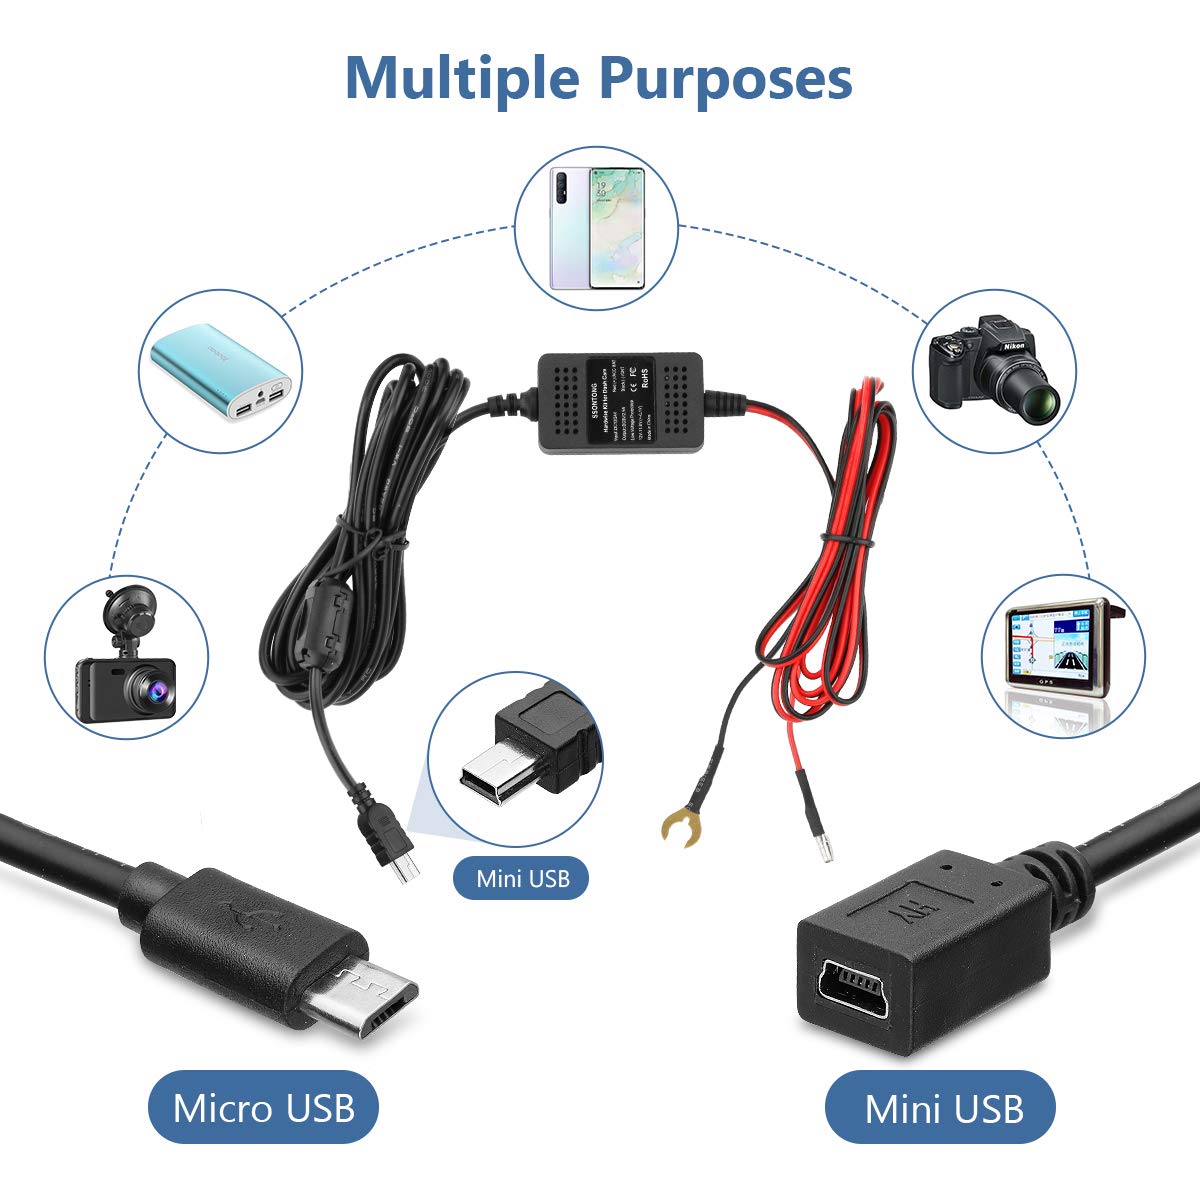 Dash Cam Hardwire Kit, Universal Hard Wire Kit for Dash Camera with Mini/Micro Port, 13ft Car Camera Charge Power Cord Kit 12V- 24V to 5V,Power Adapter with LP/Mini/ATO/Micro2 Fuse for Dashcam GPS etc